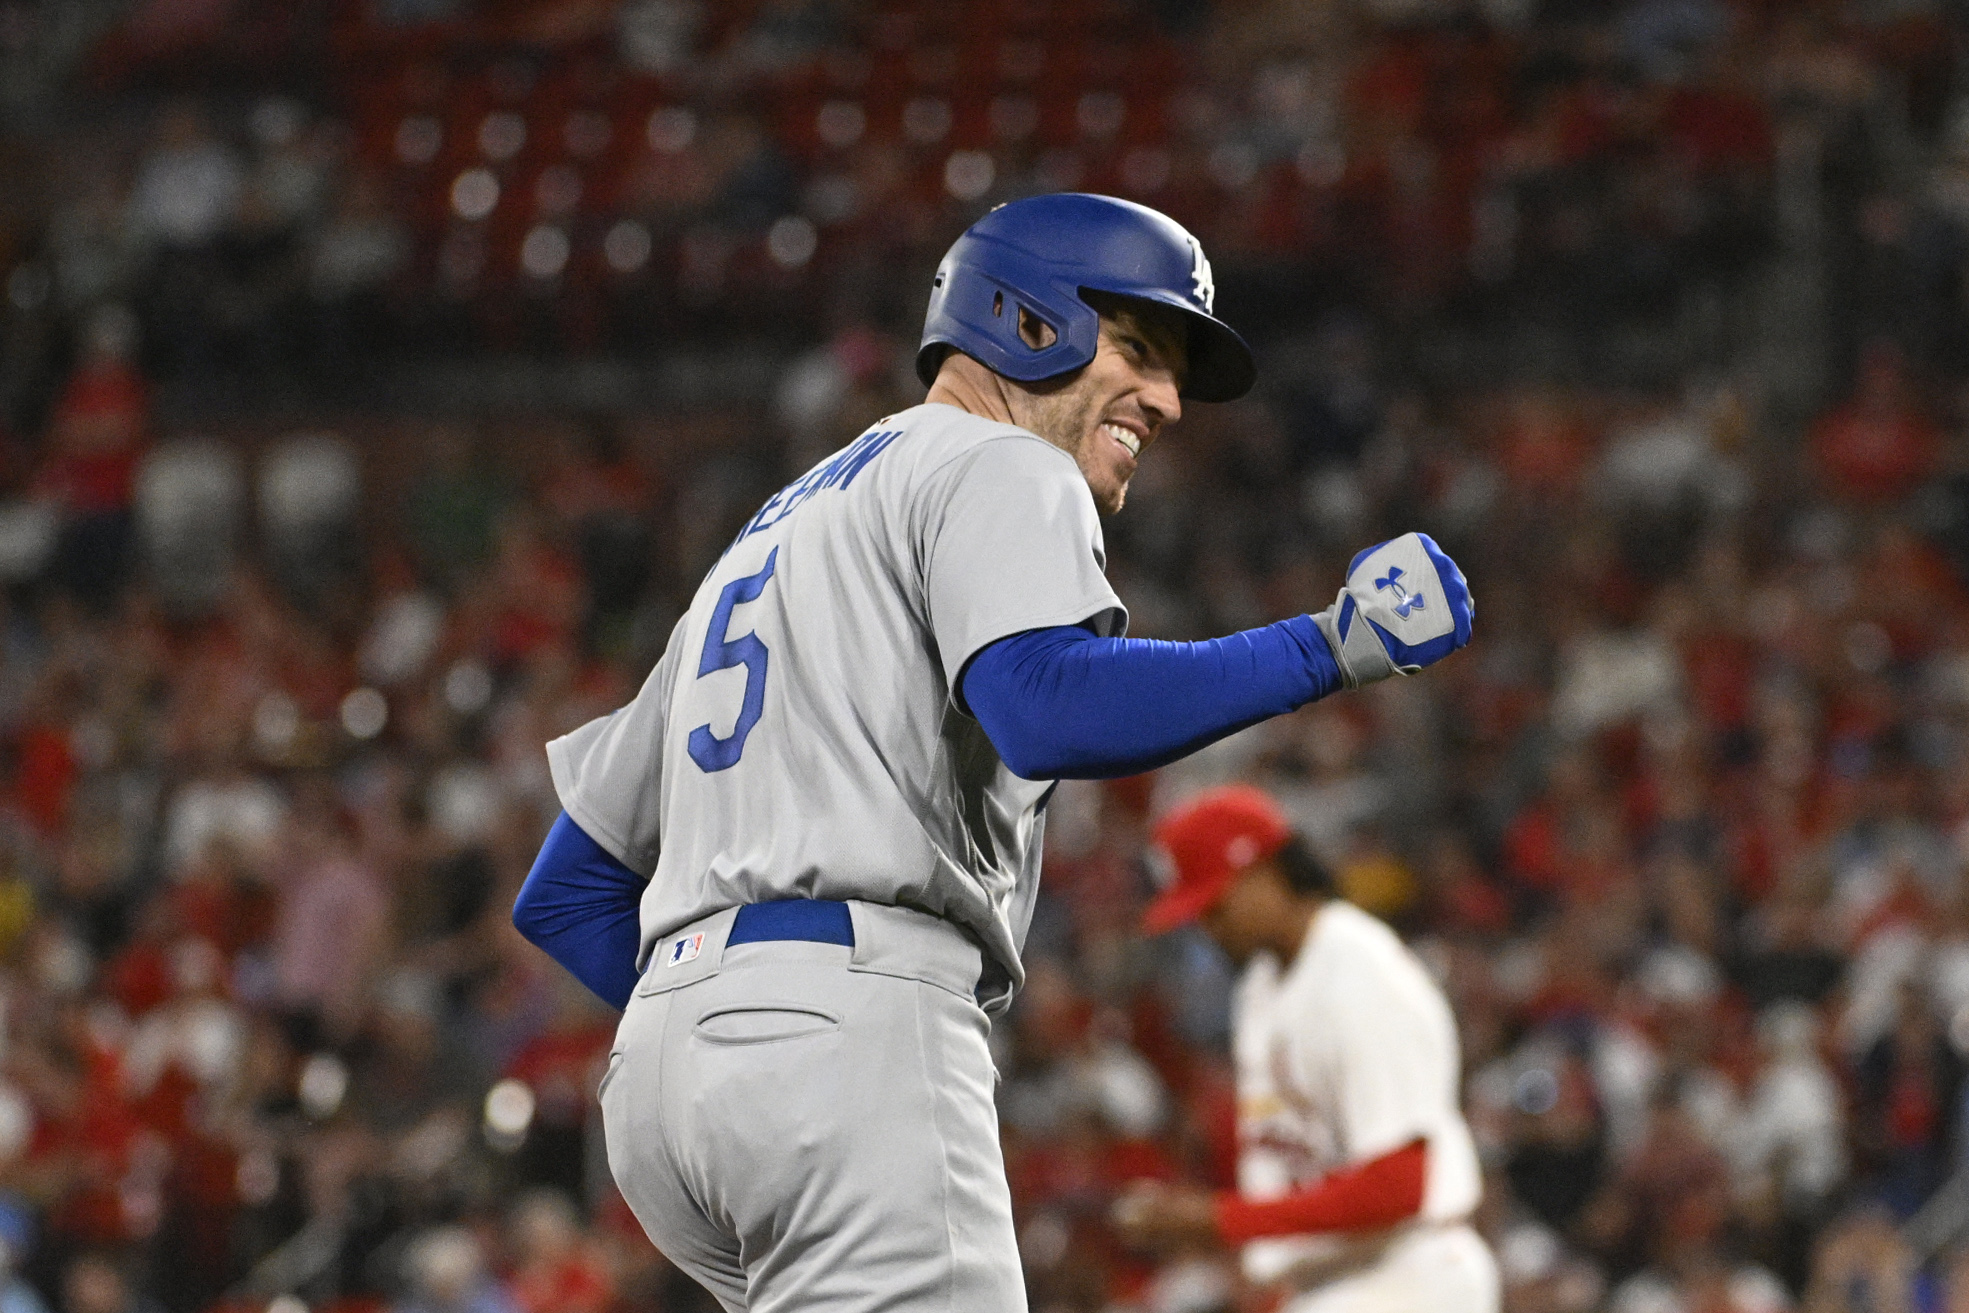 May 18, 2023; St. Louis, Missouri, USA; Los Angeles Dodgers first baseman Freddie Freeman (5) reacts after hitting a grand slam against the St. Louis Cardinals in the sixth inning at Busch Stadium. Mandatory Credit: Joe Puetz-USA TODAY Sports